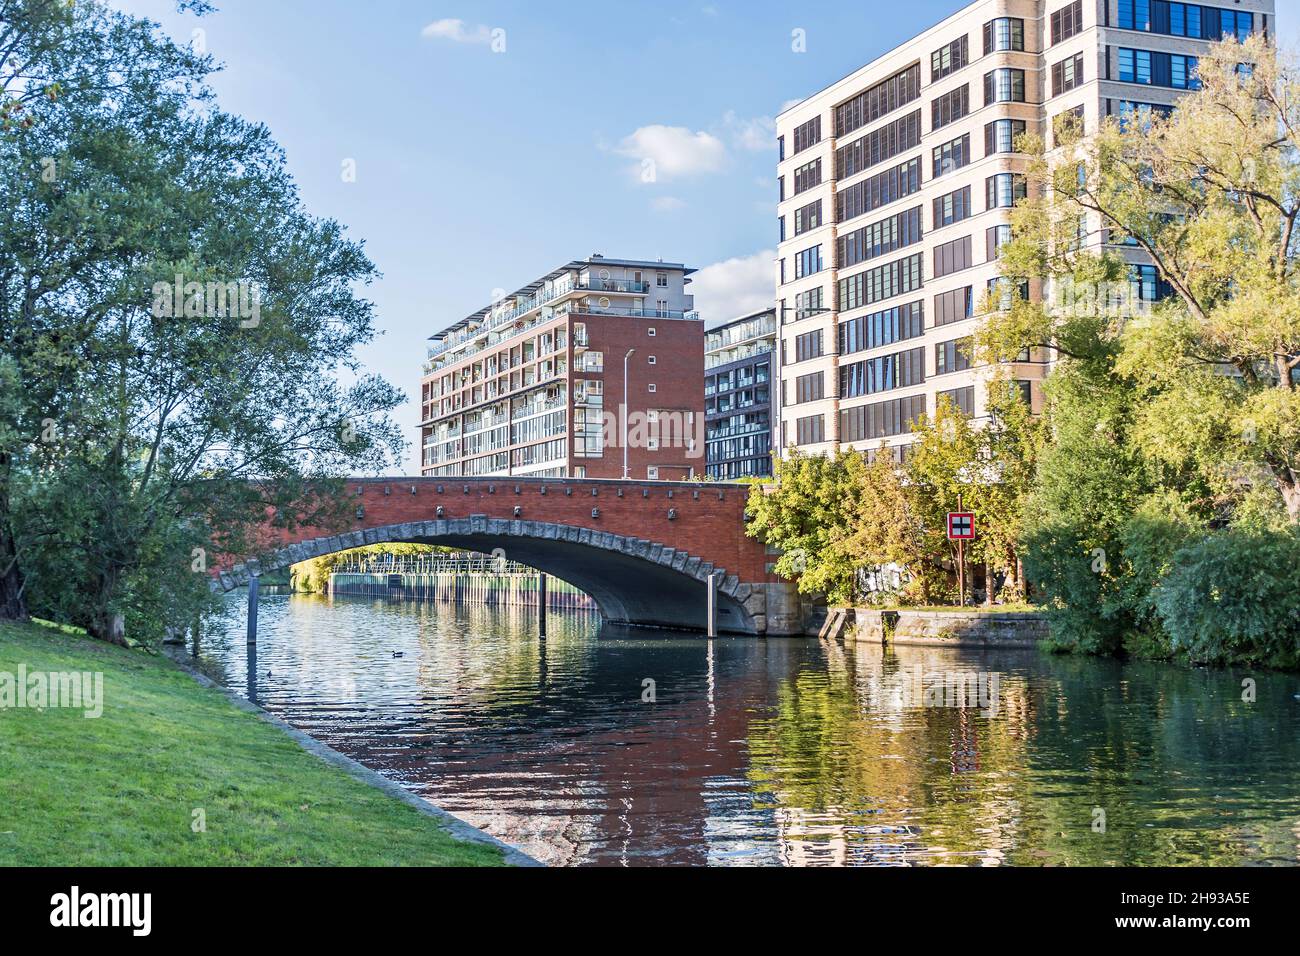 Berlin, Germany - October 7, 2021: Banks of the Landwehr Canal Salzufer and Einsteinufer with the road bridge Dovebruecke, built in 1910-1911 and a li Stock Photo